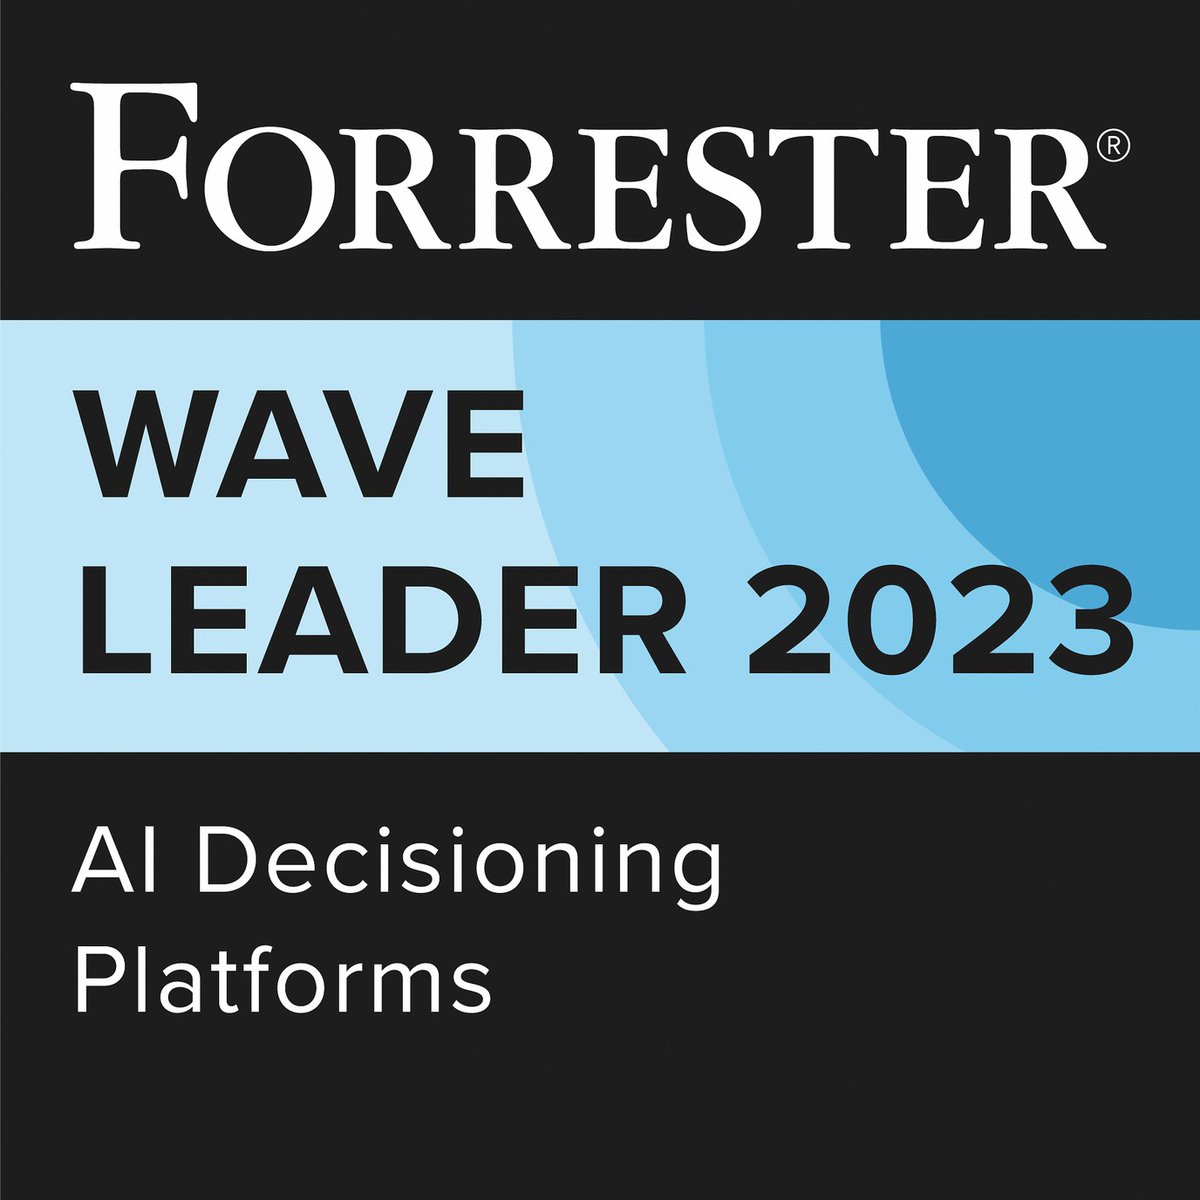 🌟 Exciting News! We are thrilled to share that SAS has been named a Leader in The Forrester Wave™: AI Decisioning Platforms, Q2 2023! Discover more about cutting-edge ModelOps approach and its impact on AI decisioning 👉 2.sas.com/6012O7G2i 📚💡

#SASViya #AI #ModelOps